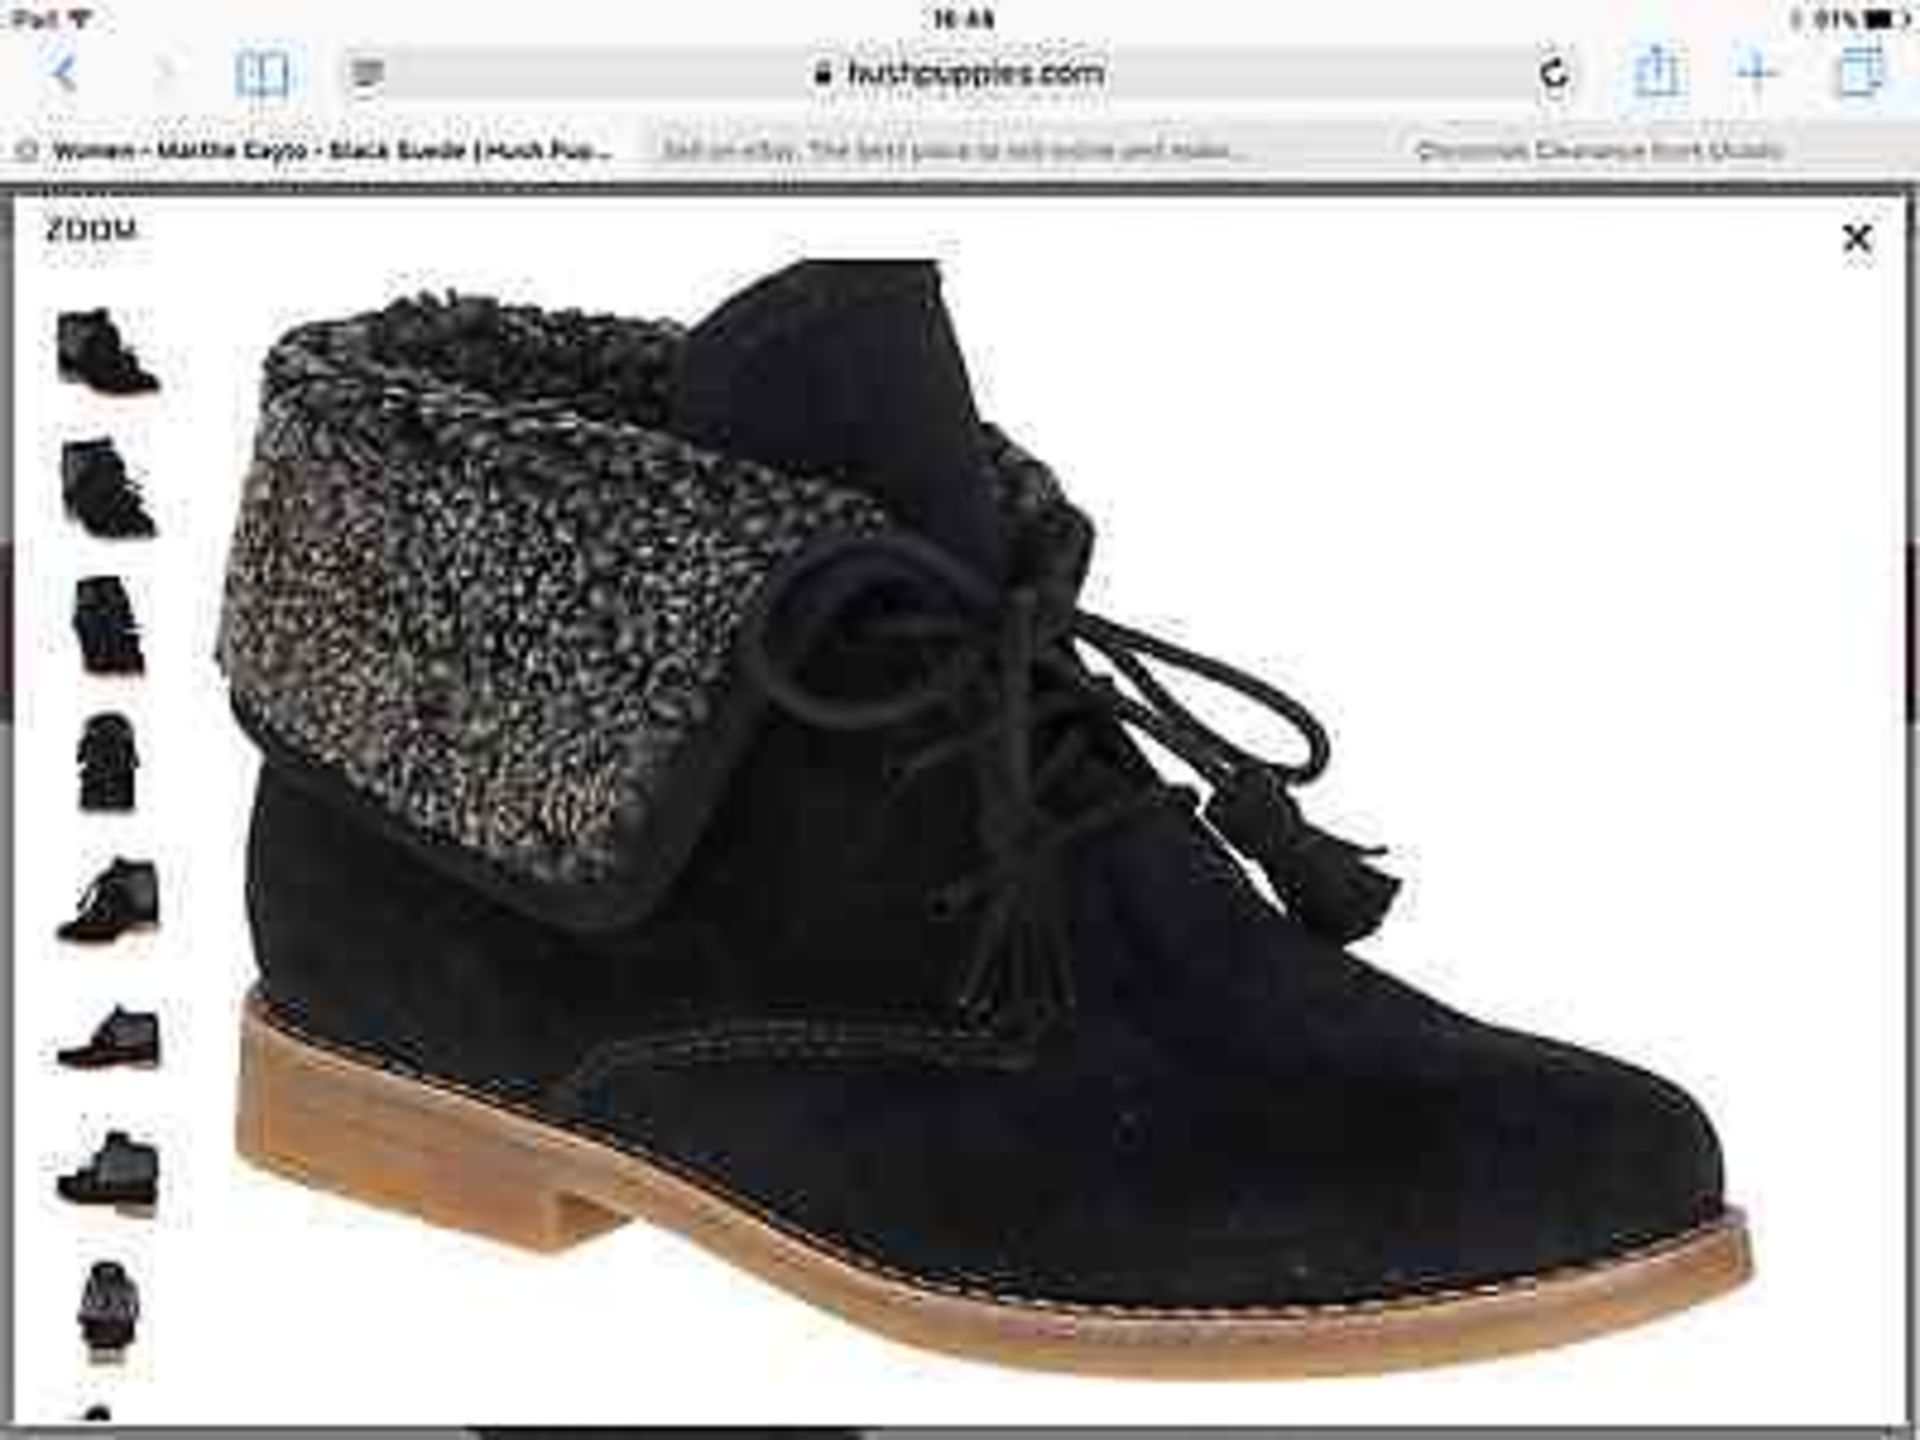 Hush Puppies Black Suede Martha Cayto Ankle Boot, Size UK 7, RRP £100 (New with box) [Ref: ] - Image 4 of 12